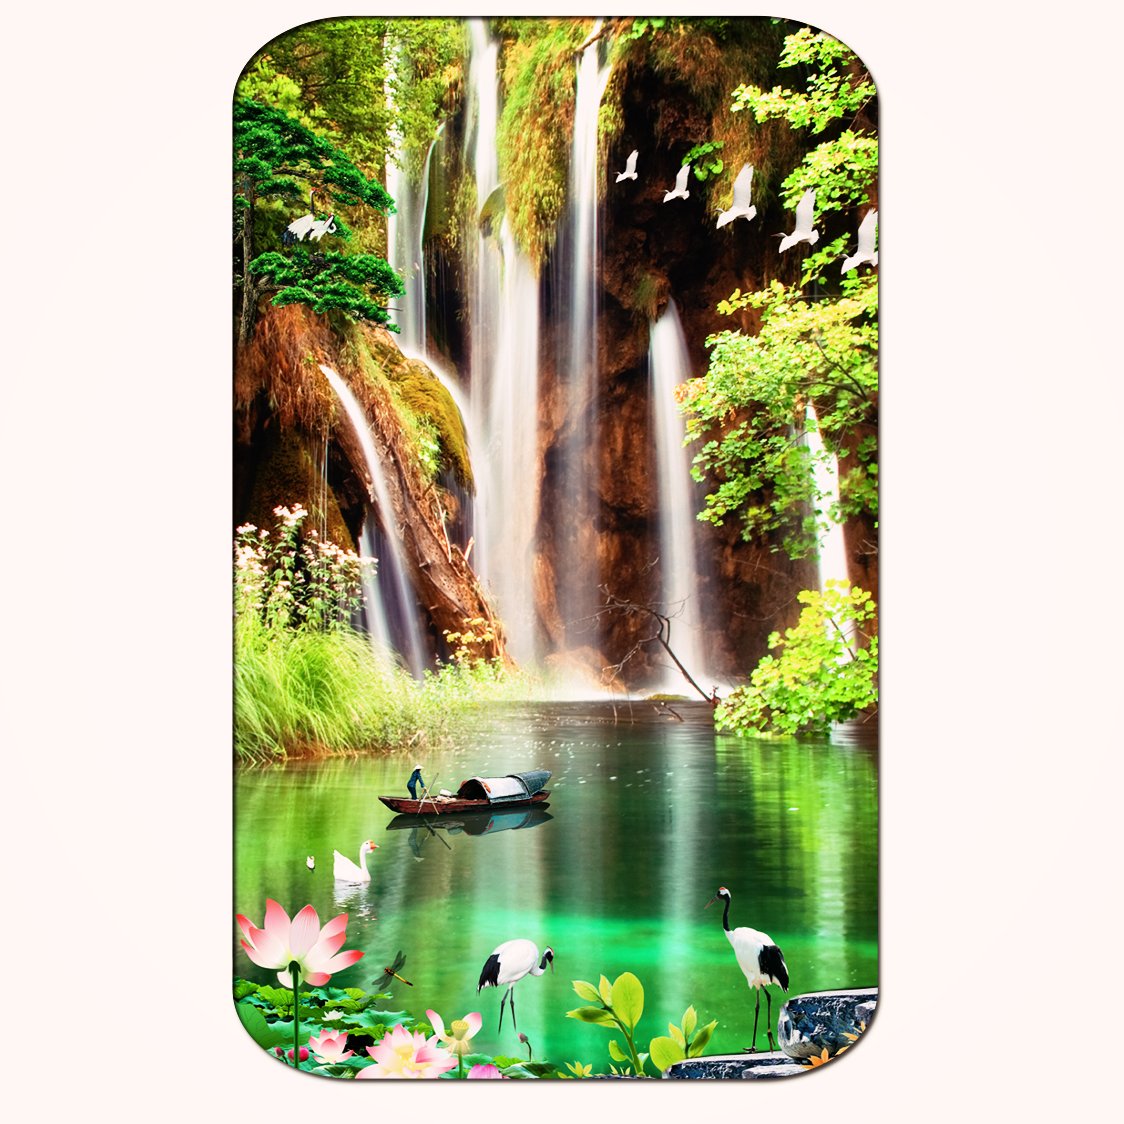 Casperme Beautiful Waterfalls Big Frame Wall Painting For Living Room & Office (18 x 36 inches)